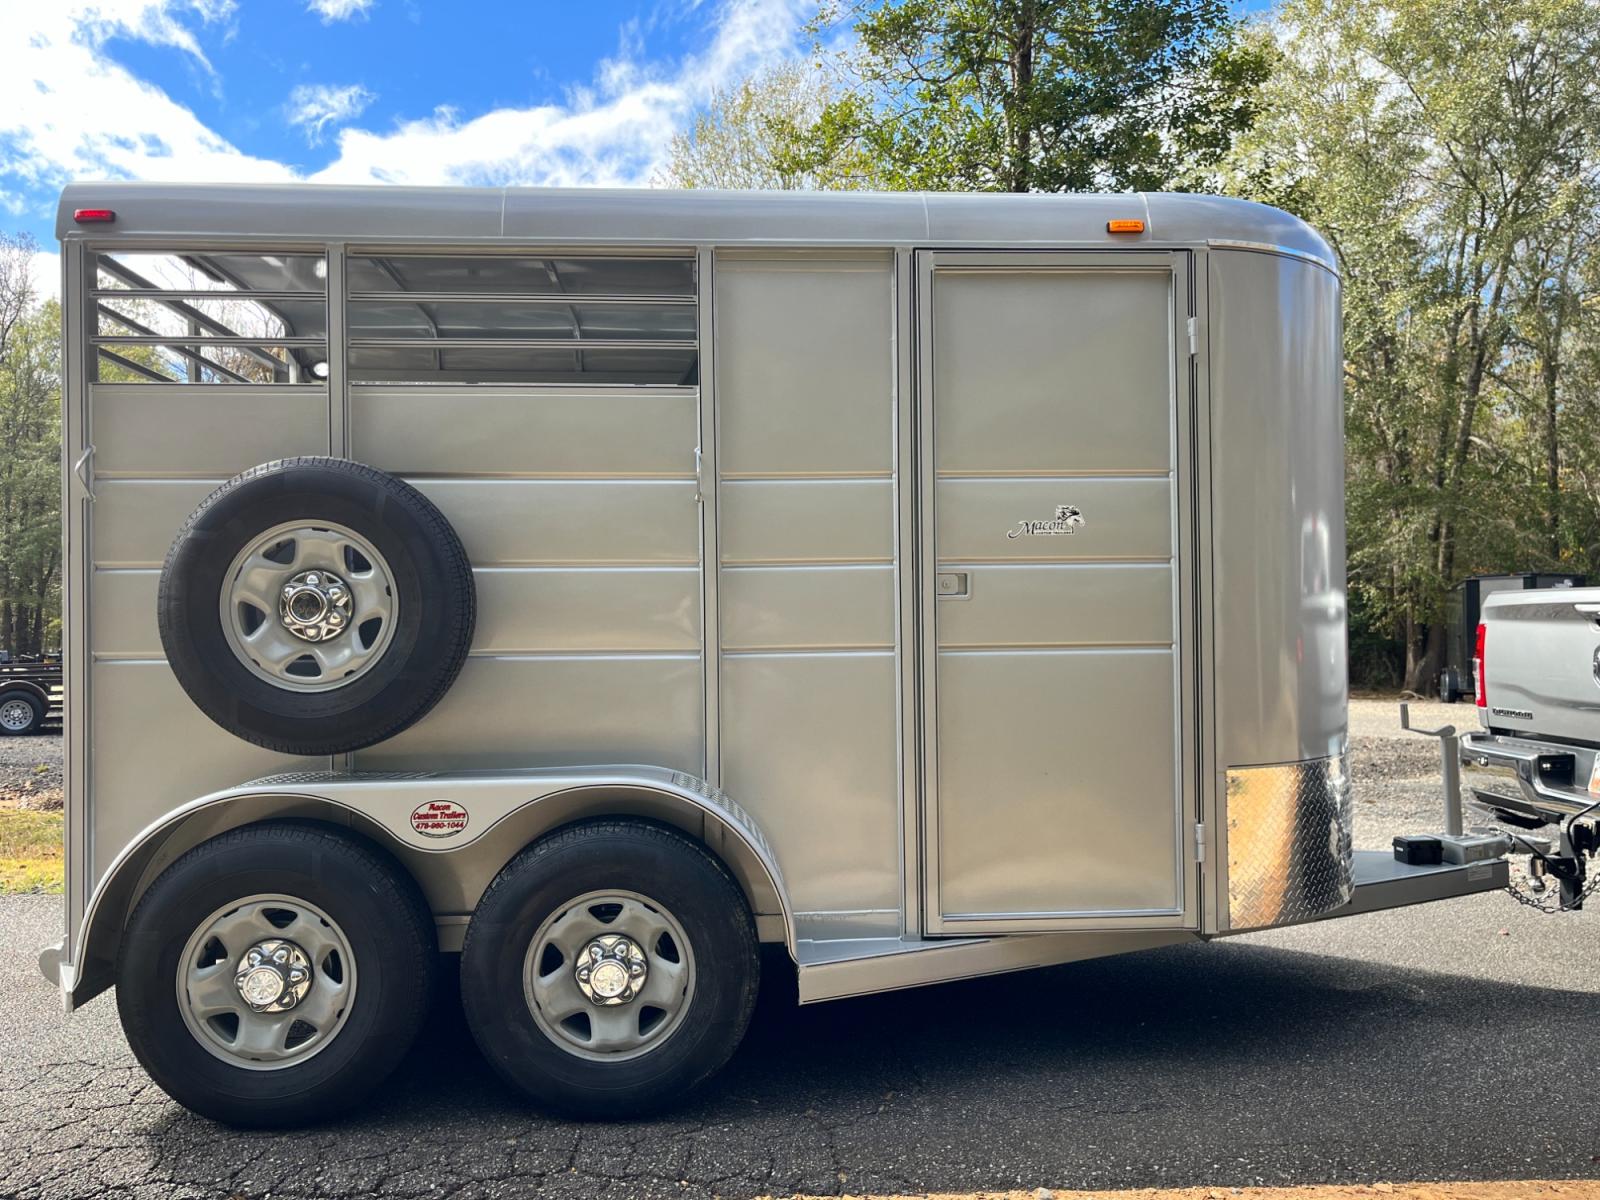 2023 Silver Metallic Calico 2 Horse Slant , located at 1330 Rainey Rd., Macon, 31220, (478) 960-1044, 32.845638, -83.778687 - Brand New 2023 Model 2 Horse Slant Calico Brand Trailer! 6ft Wide X 13ft Long Deluxe Model Tandem Axle Trailer! Easy Close Slant Divider Latch! 16" Radials! Beautiful Silver Metallic Paint is Awesome! Black Pin Striping Looks Fantastic! Fully Caulked Inside and Out to Prevent Rust! The Paint i - Photo #5